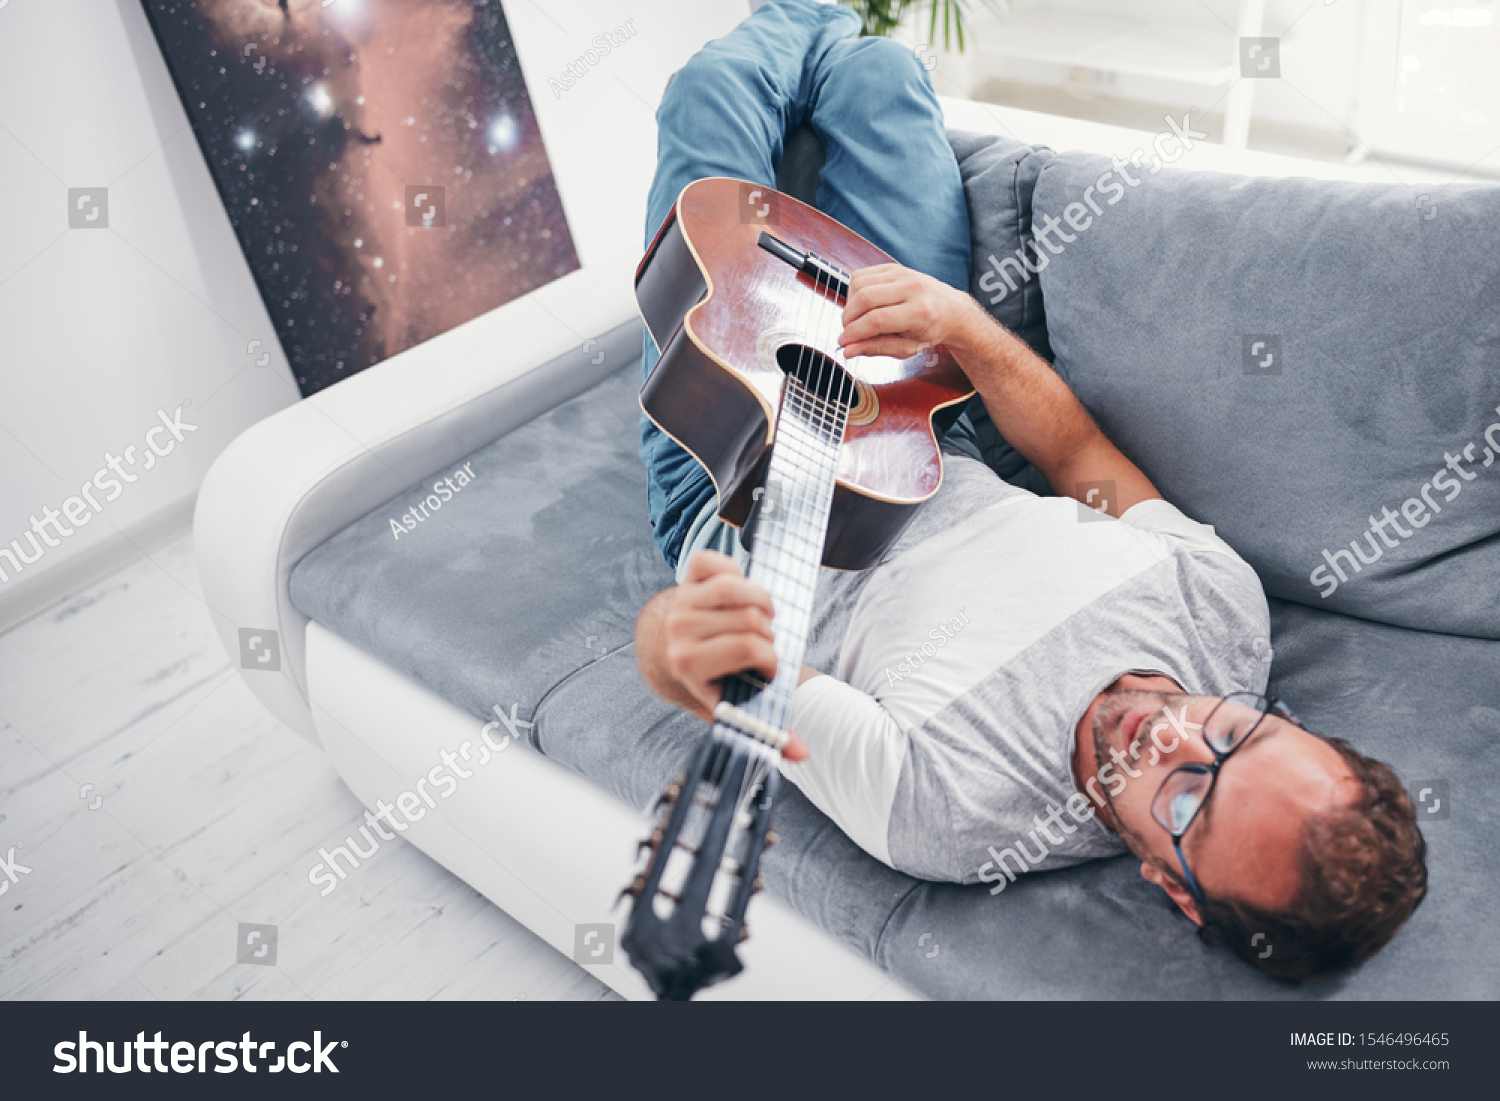 Man playing acoustic guitar in the living room. #1546496465